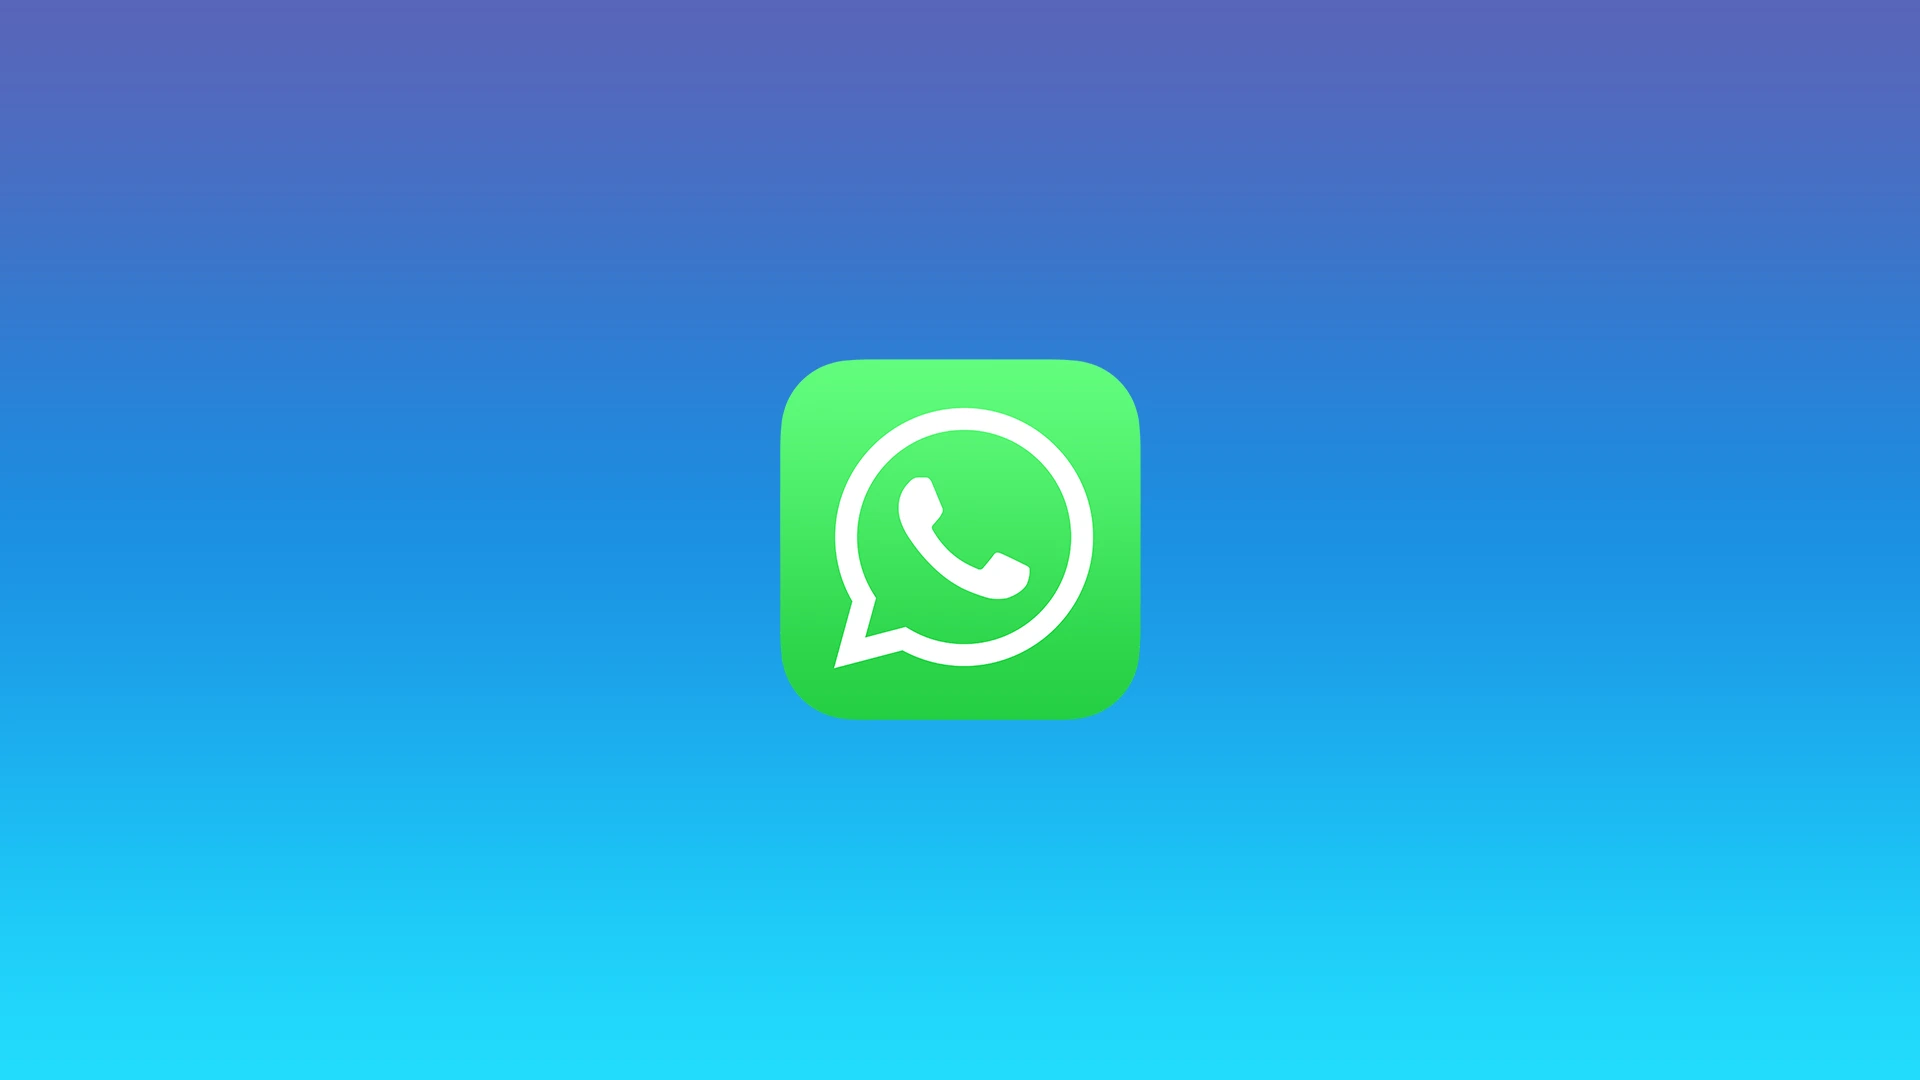 Why is your phone number invalid on WhatsApp